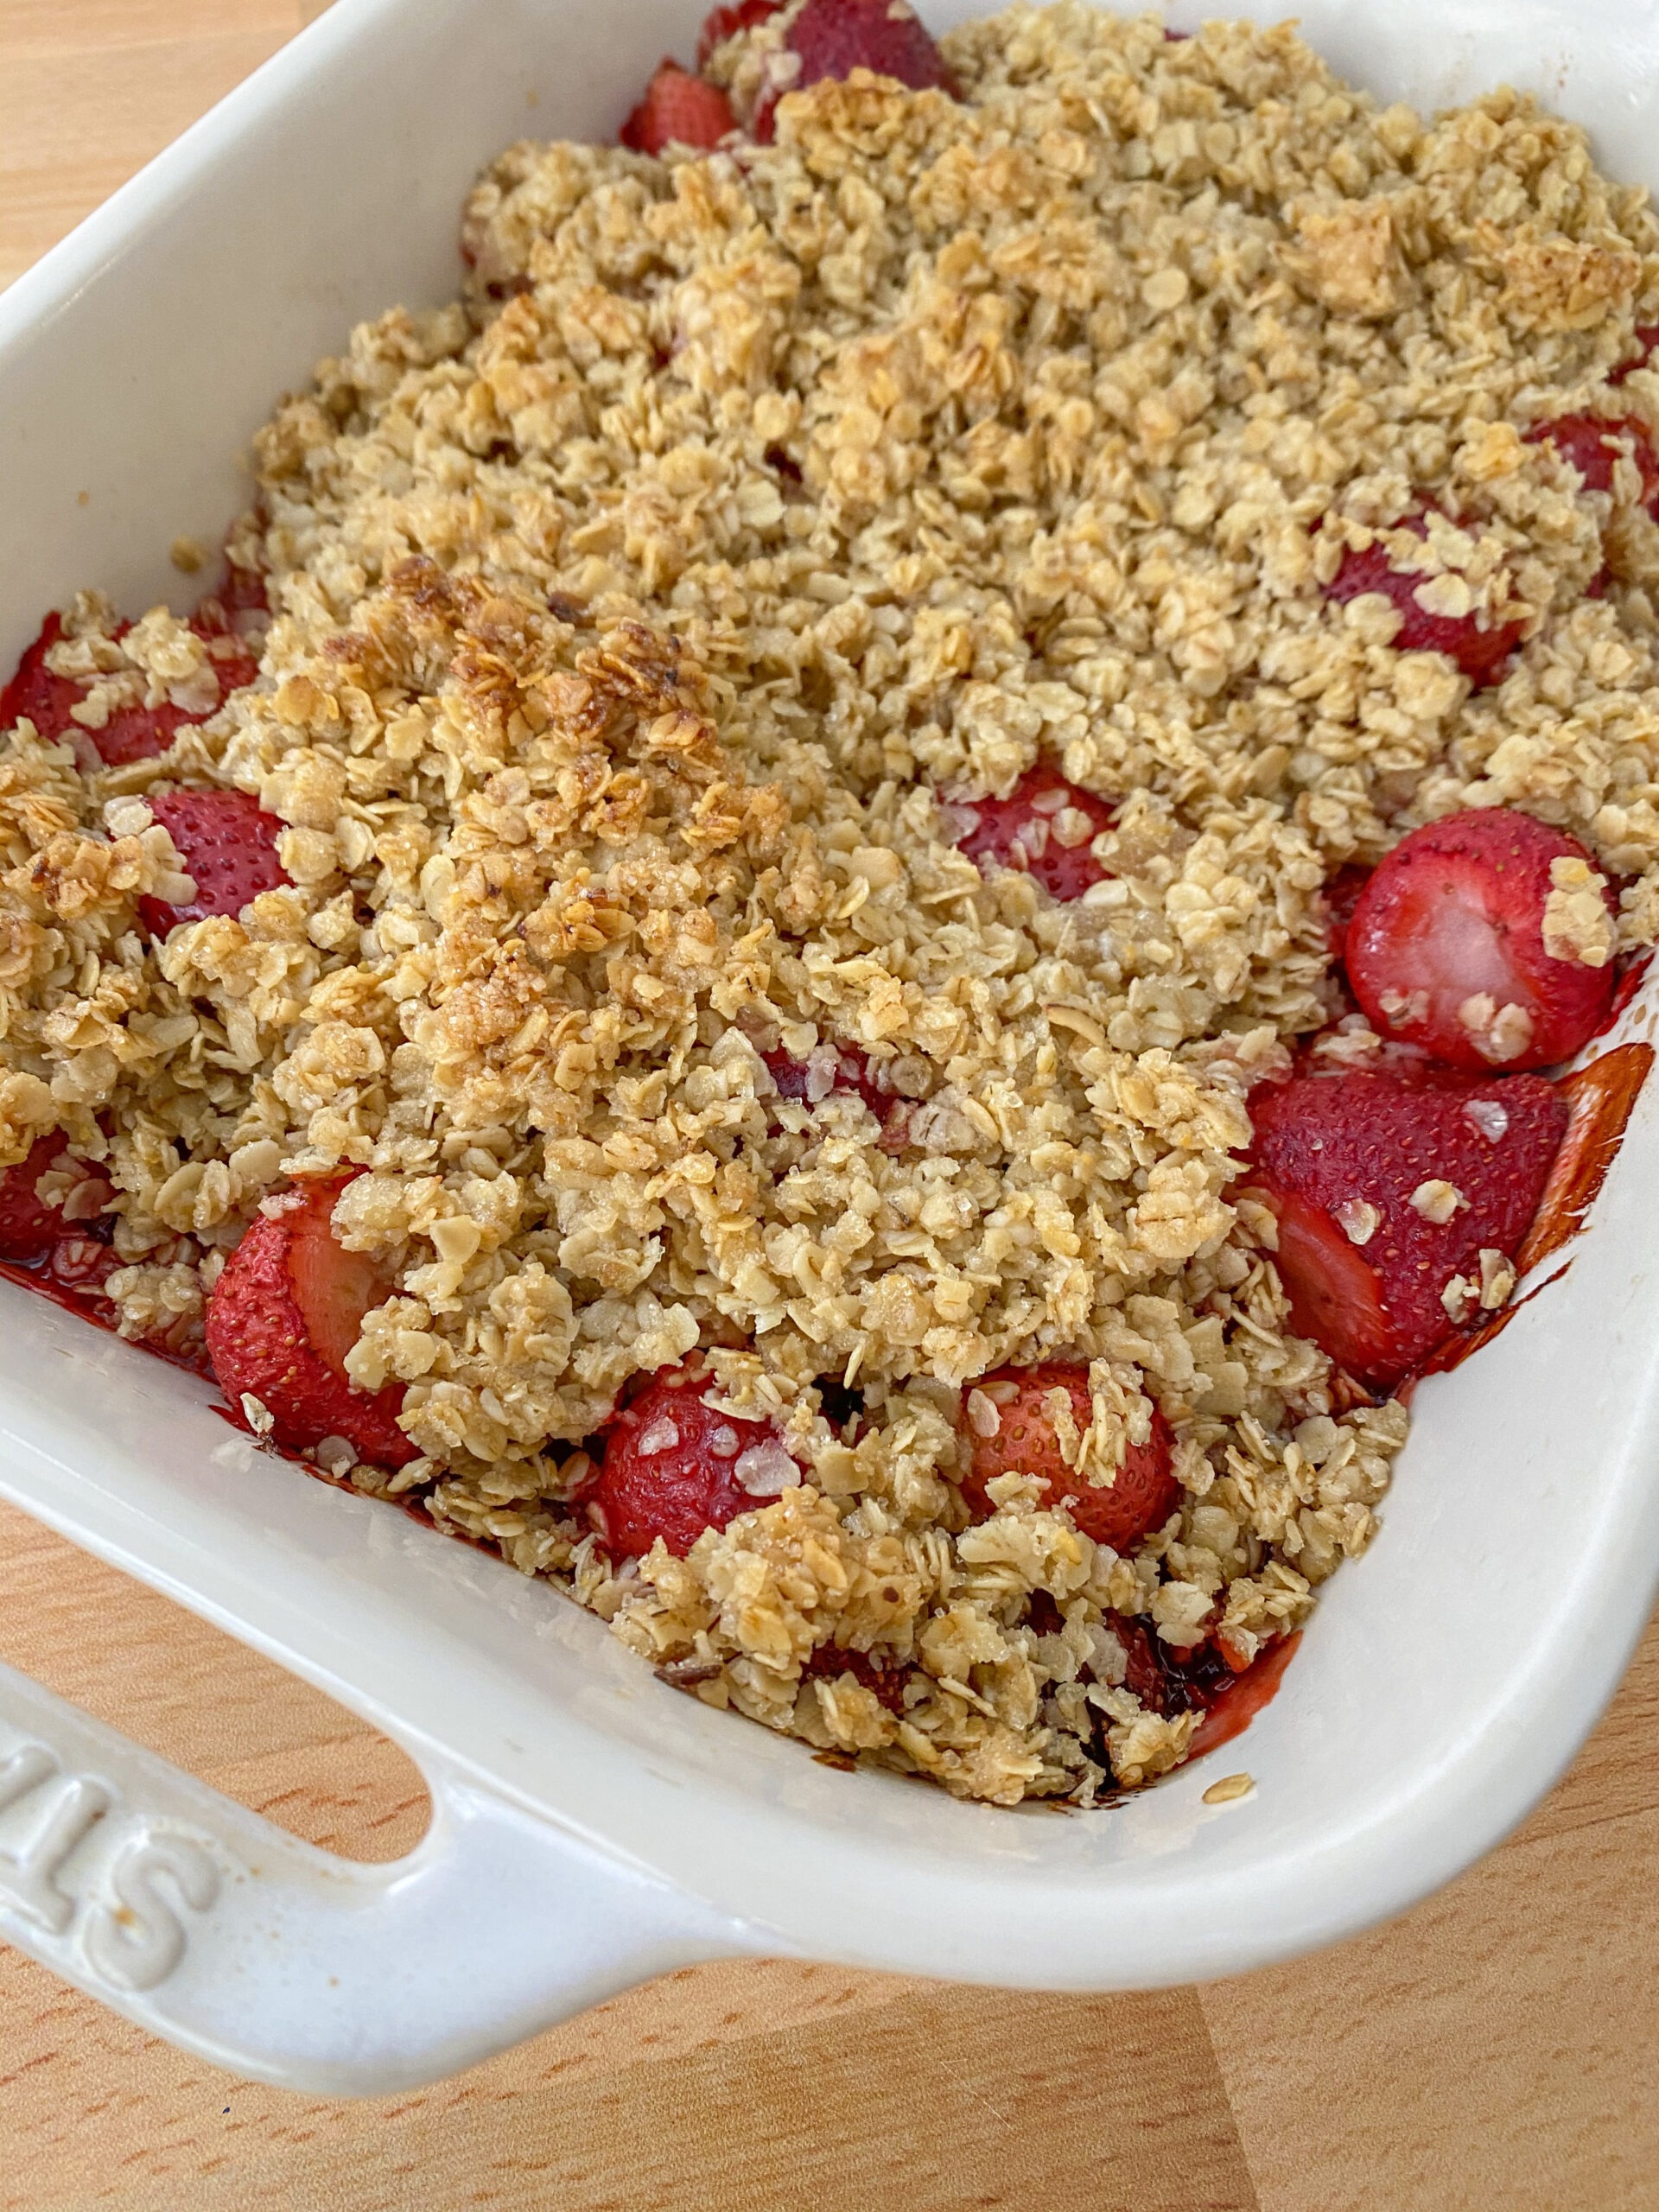 Baked strawberry crumble in a white baking dish.